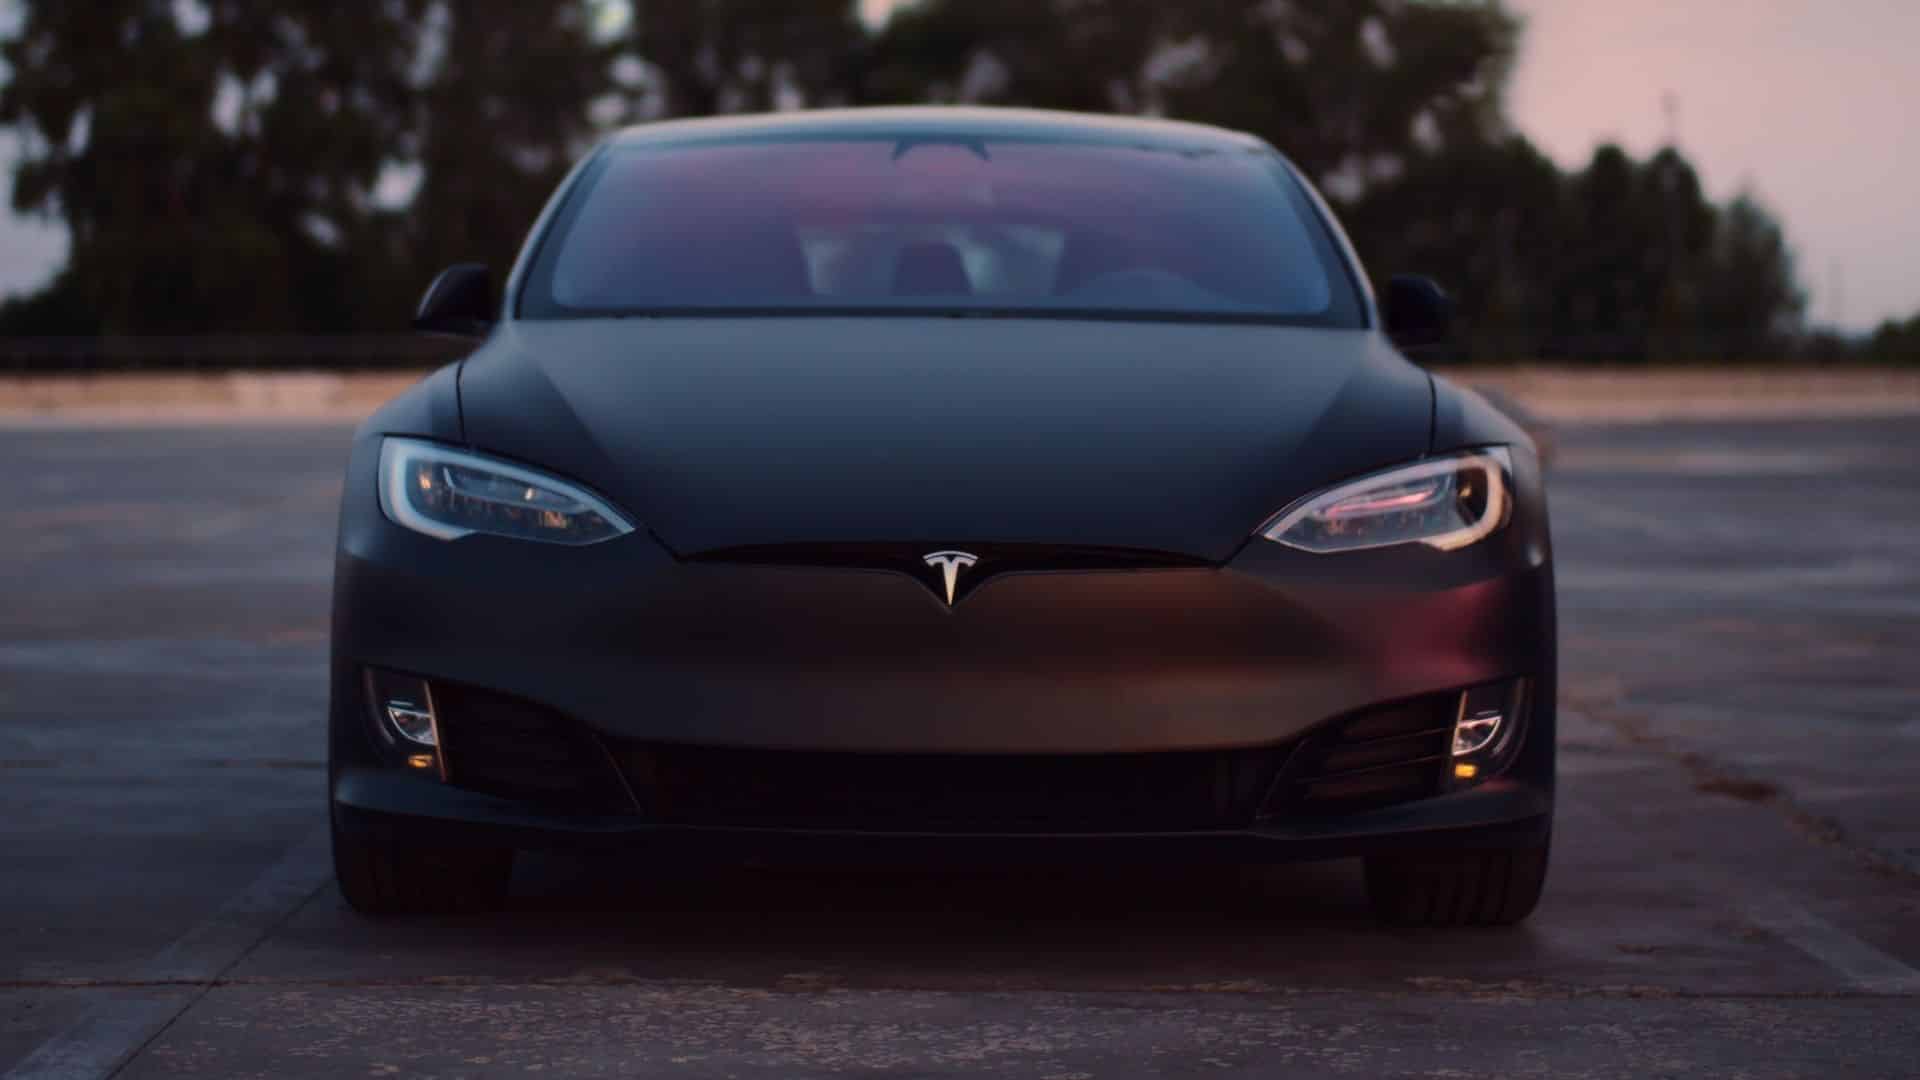 Tesla’s Big Texas Move: What It Means for Elon Musk and Shareholders